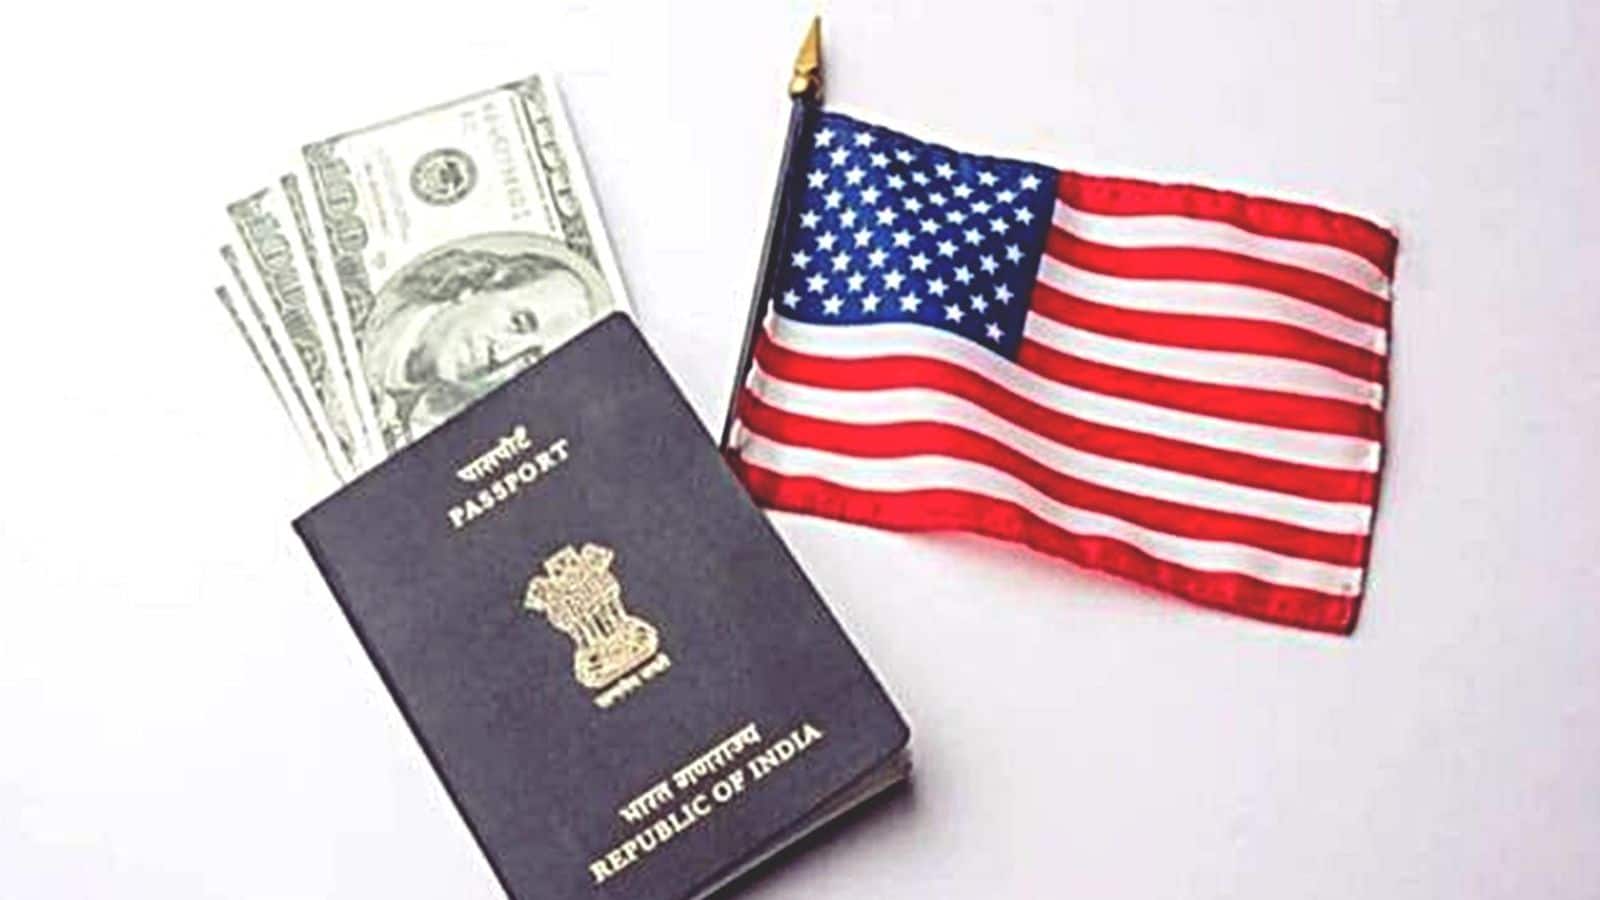 H-1B visa registration deadline tomorrow: All about the new guidelines